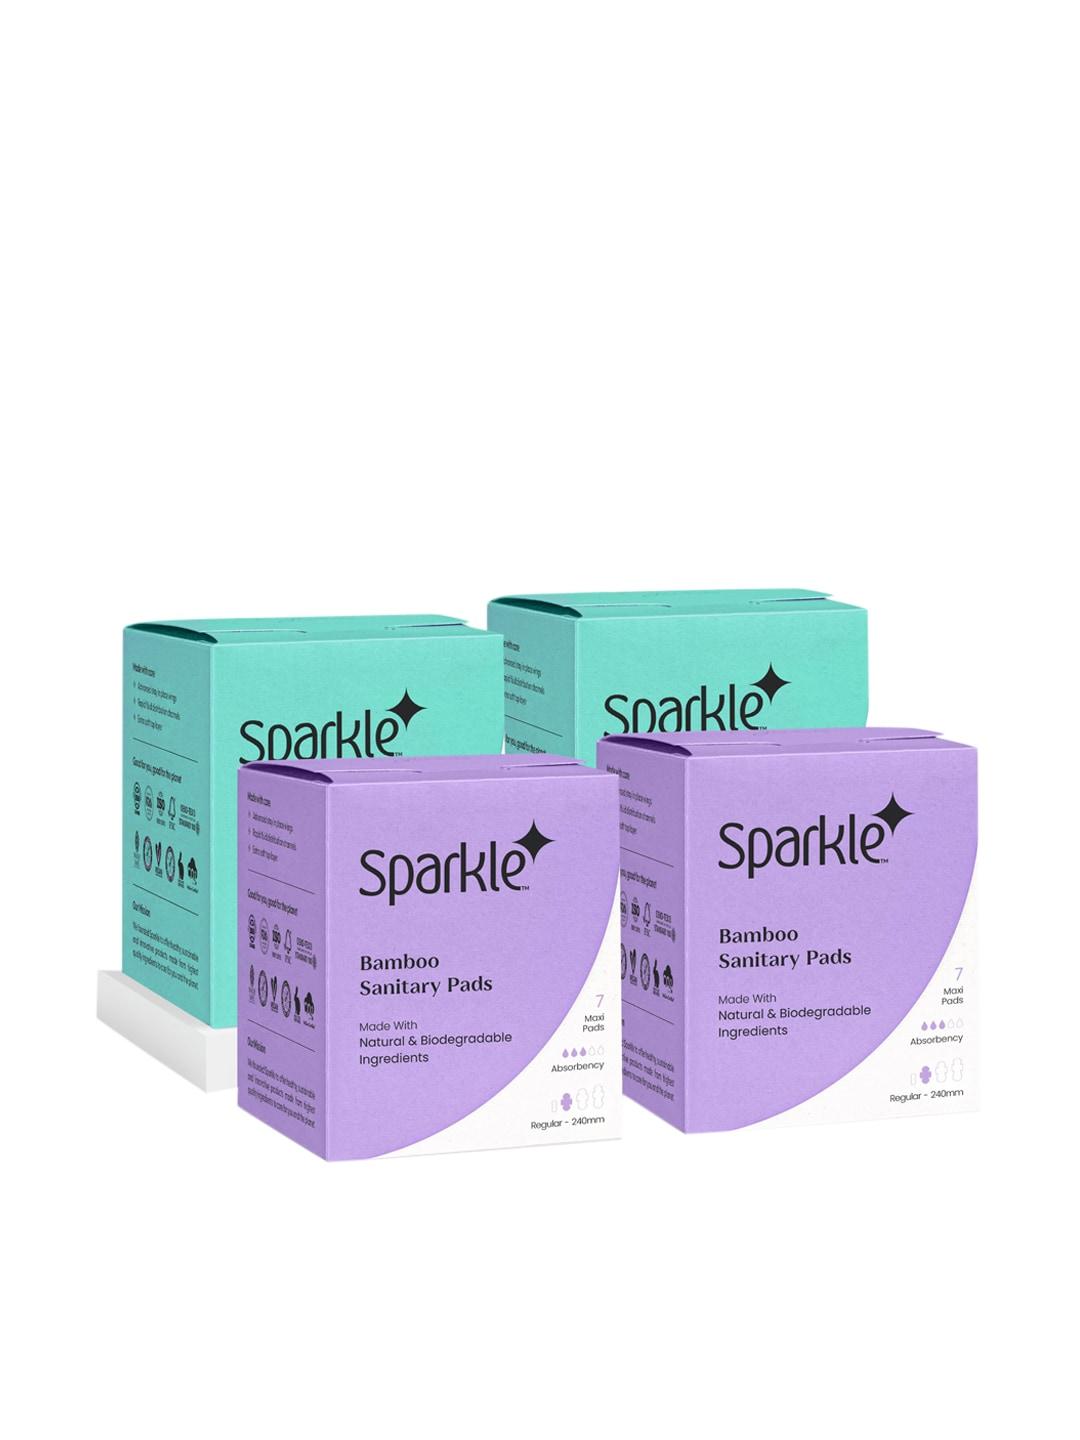 Sparkle Pack of 4 Bamboo Sanitary Pads- Regular 240mm & Large 280mm-2 Pack Each